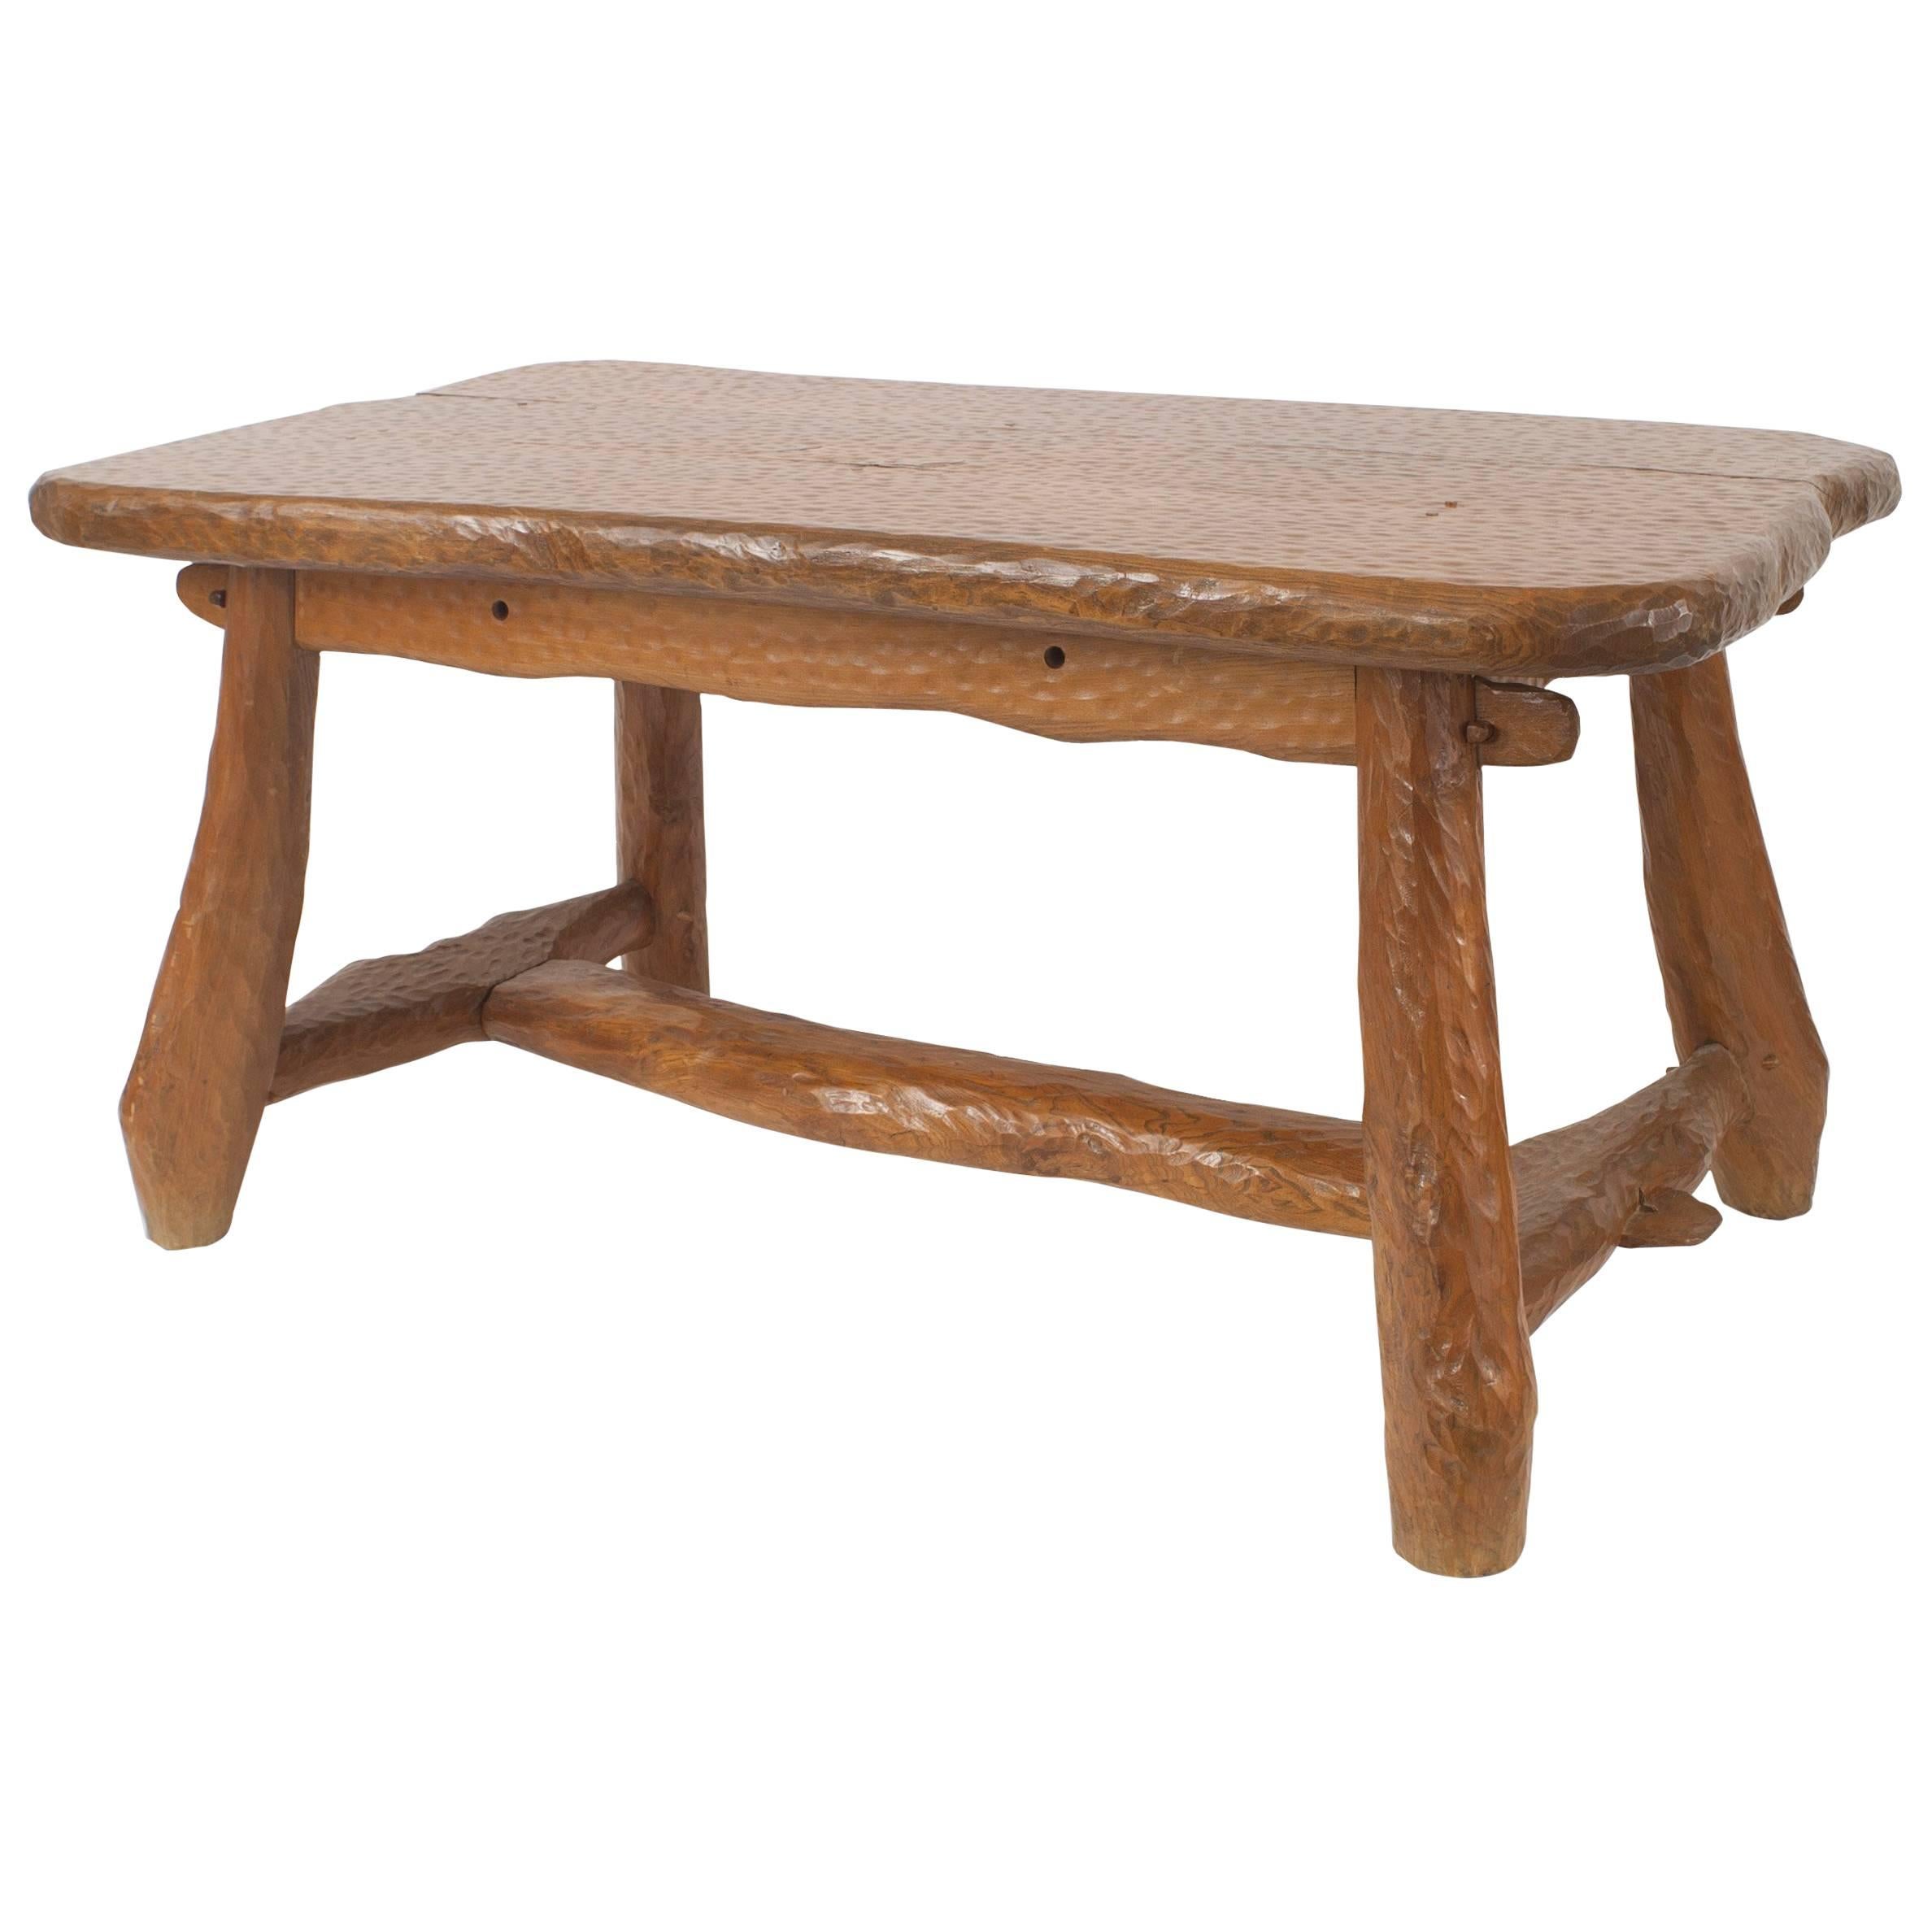 Rustic Adirondack Style Pine Dining Table For Sale